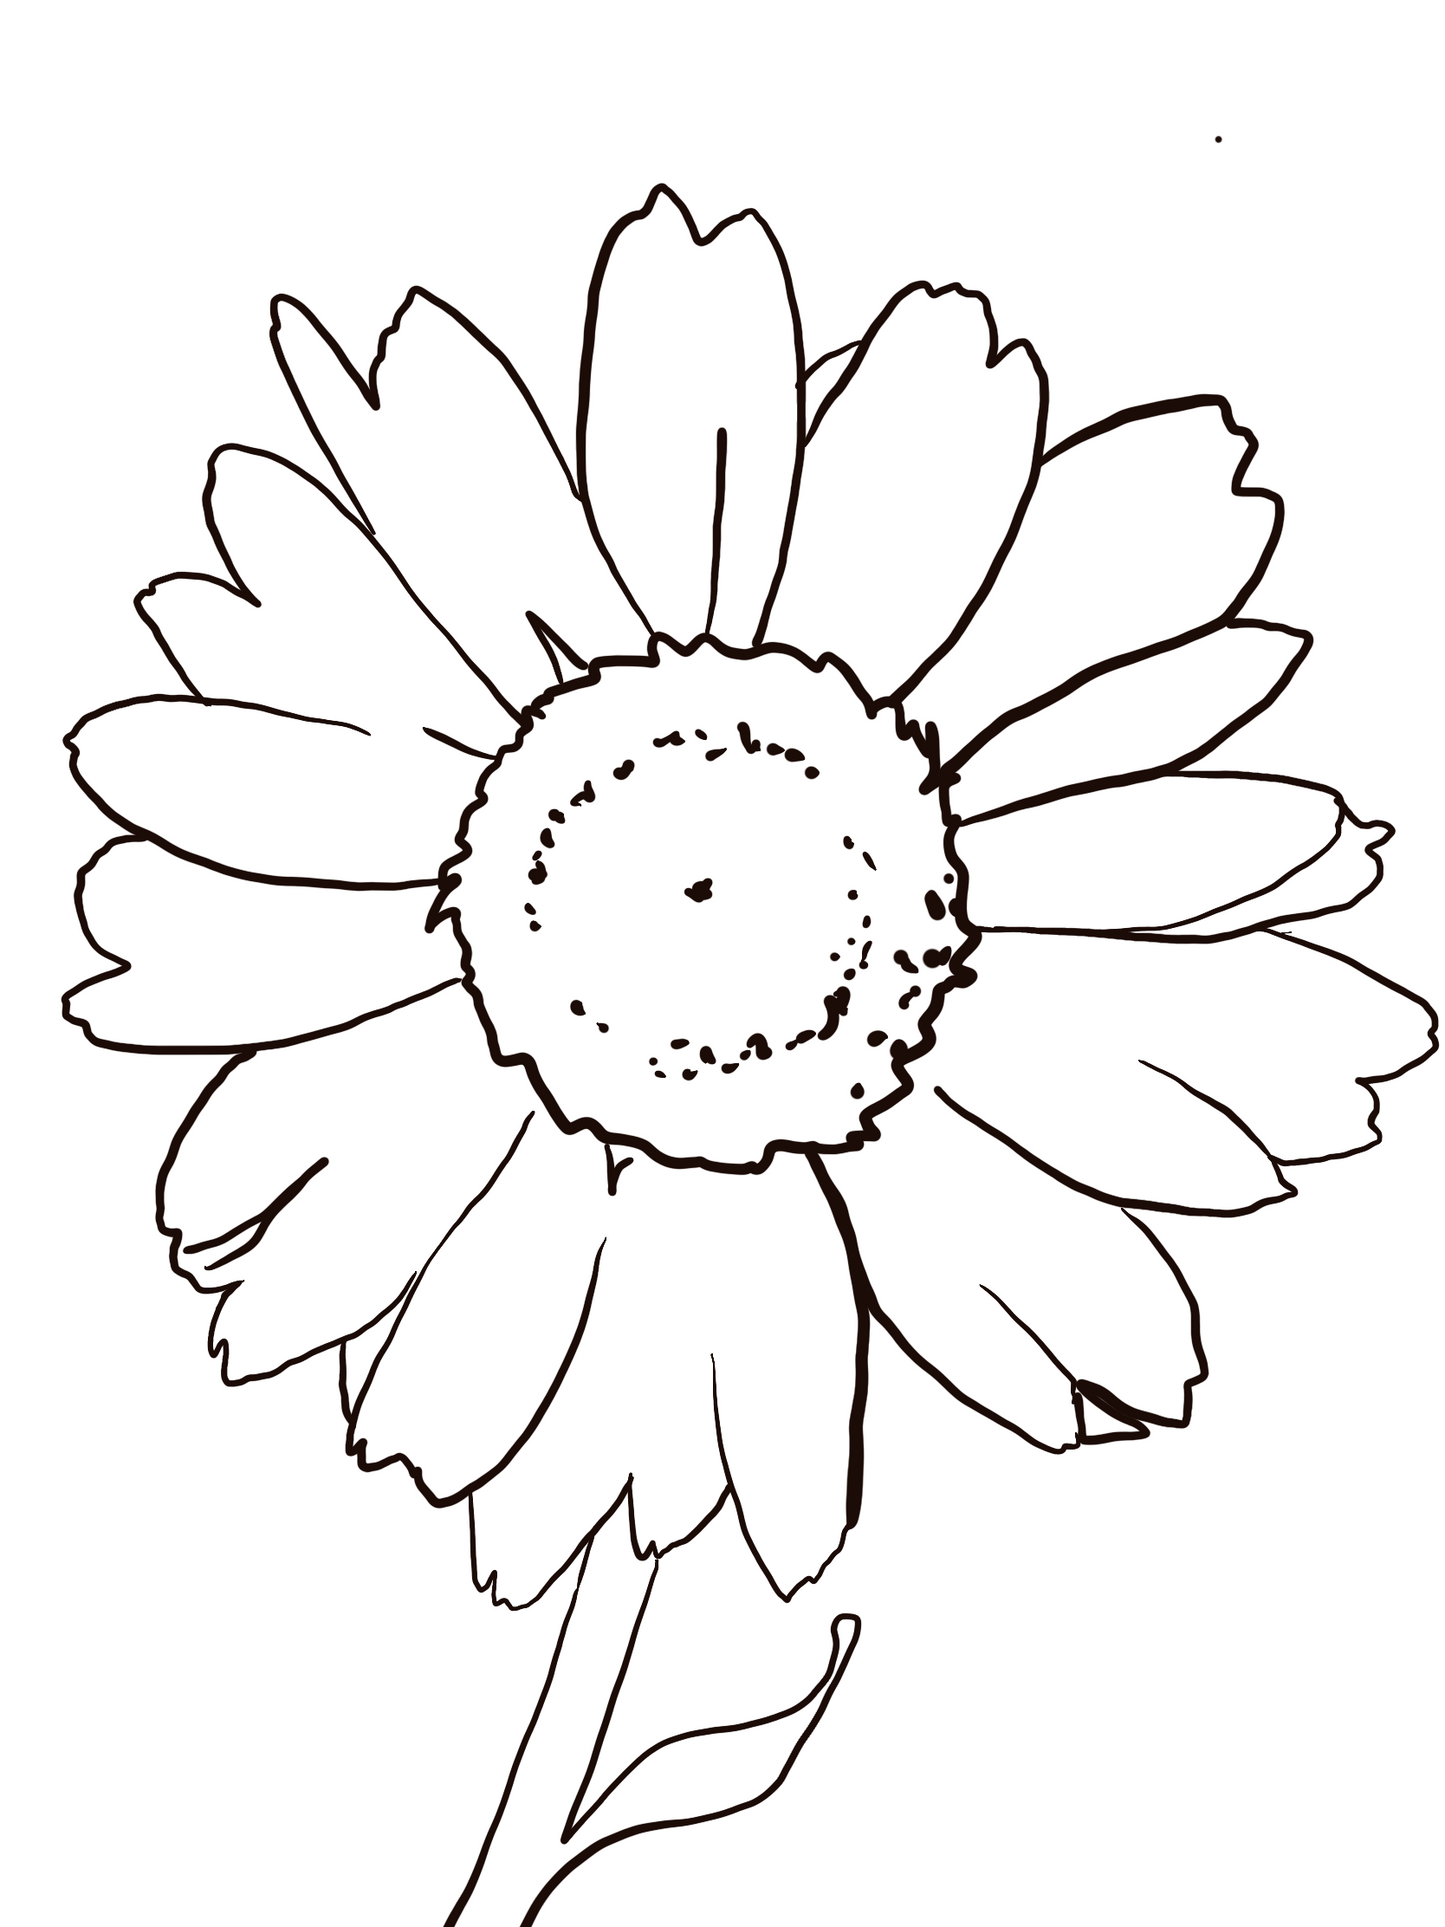 April Birth Flower Daisy (black and white)